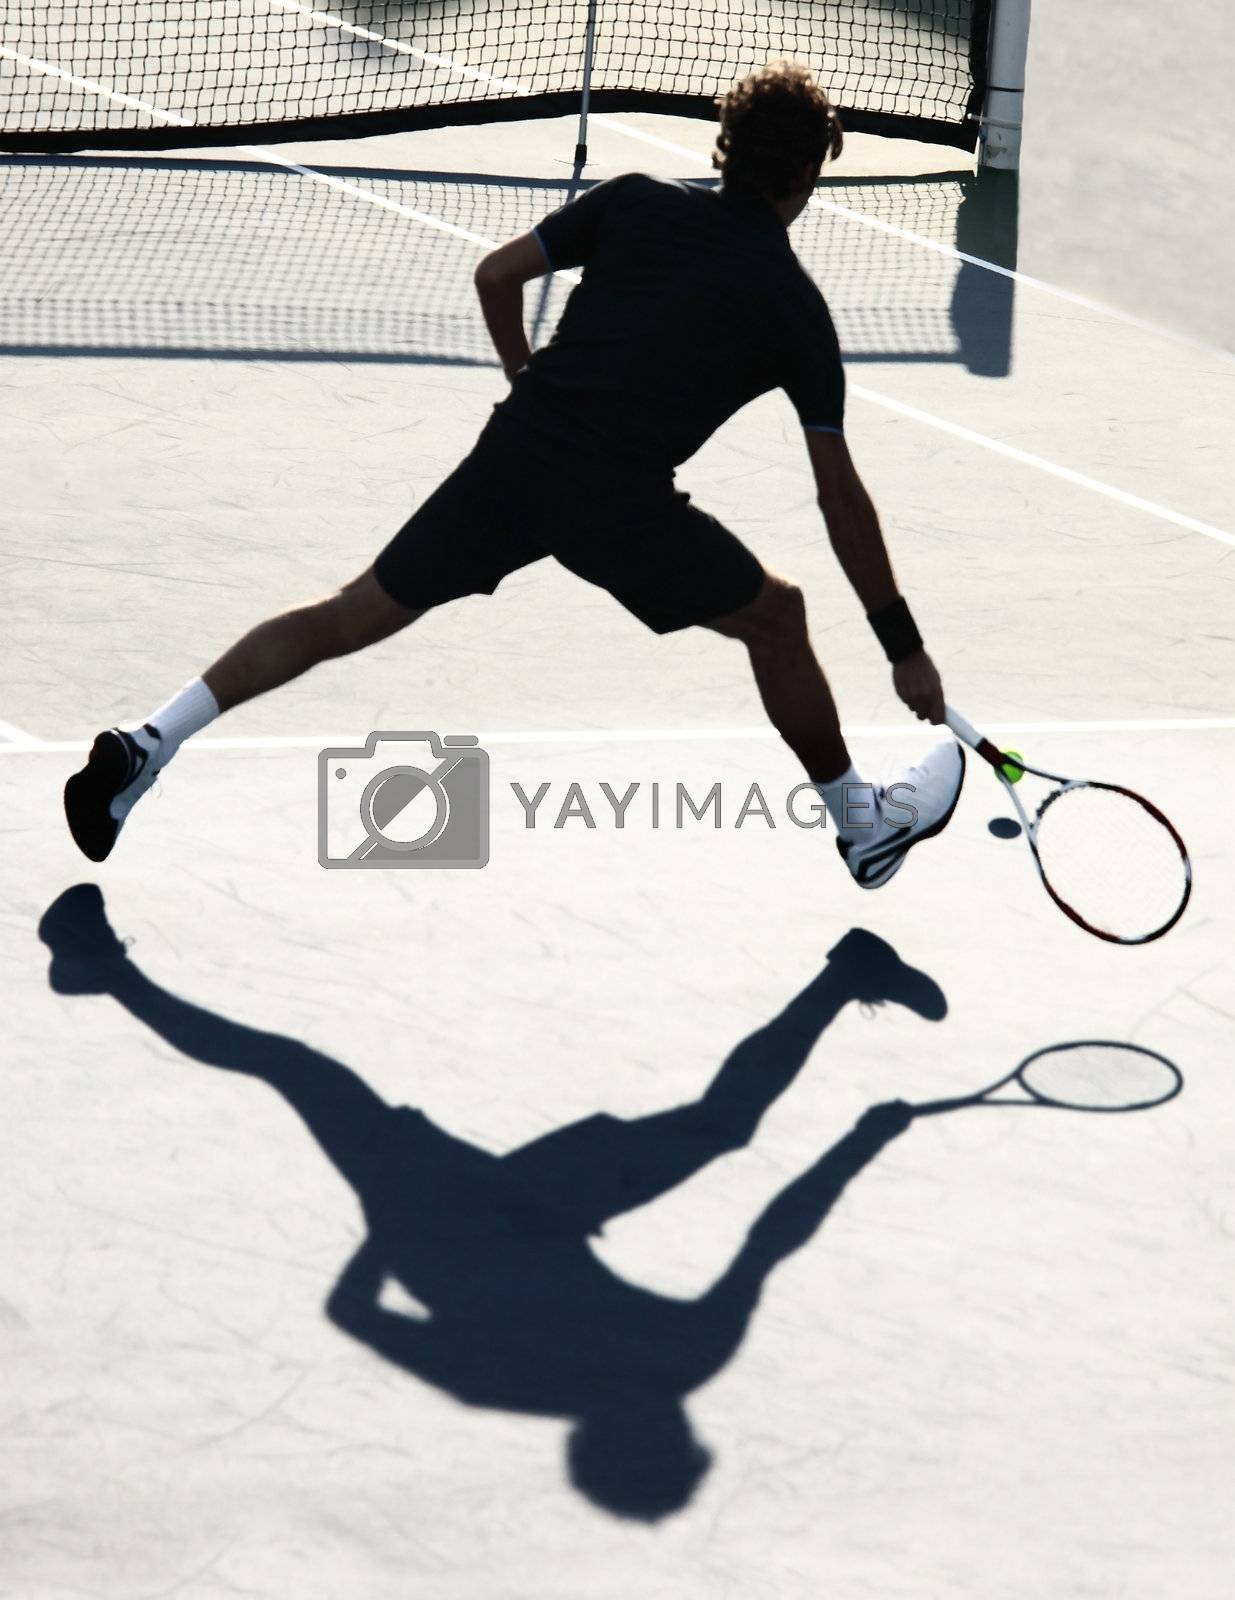 Royalty free image of Tennis player in action by Anna_Omelchenko